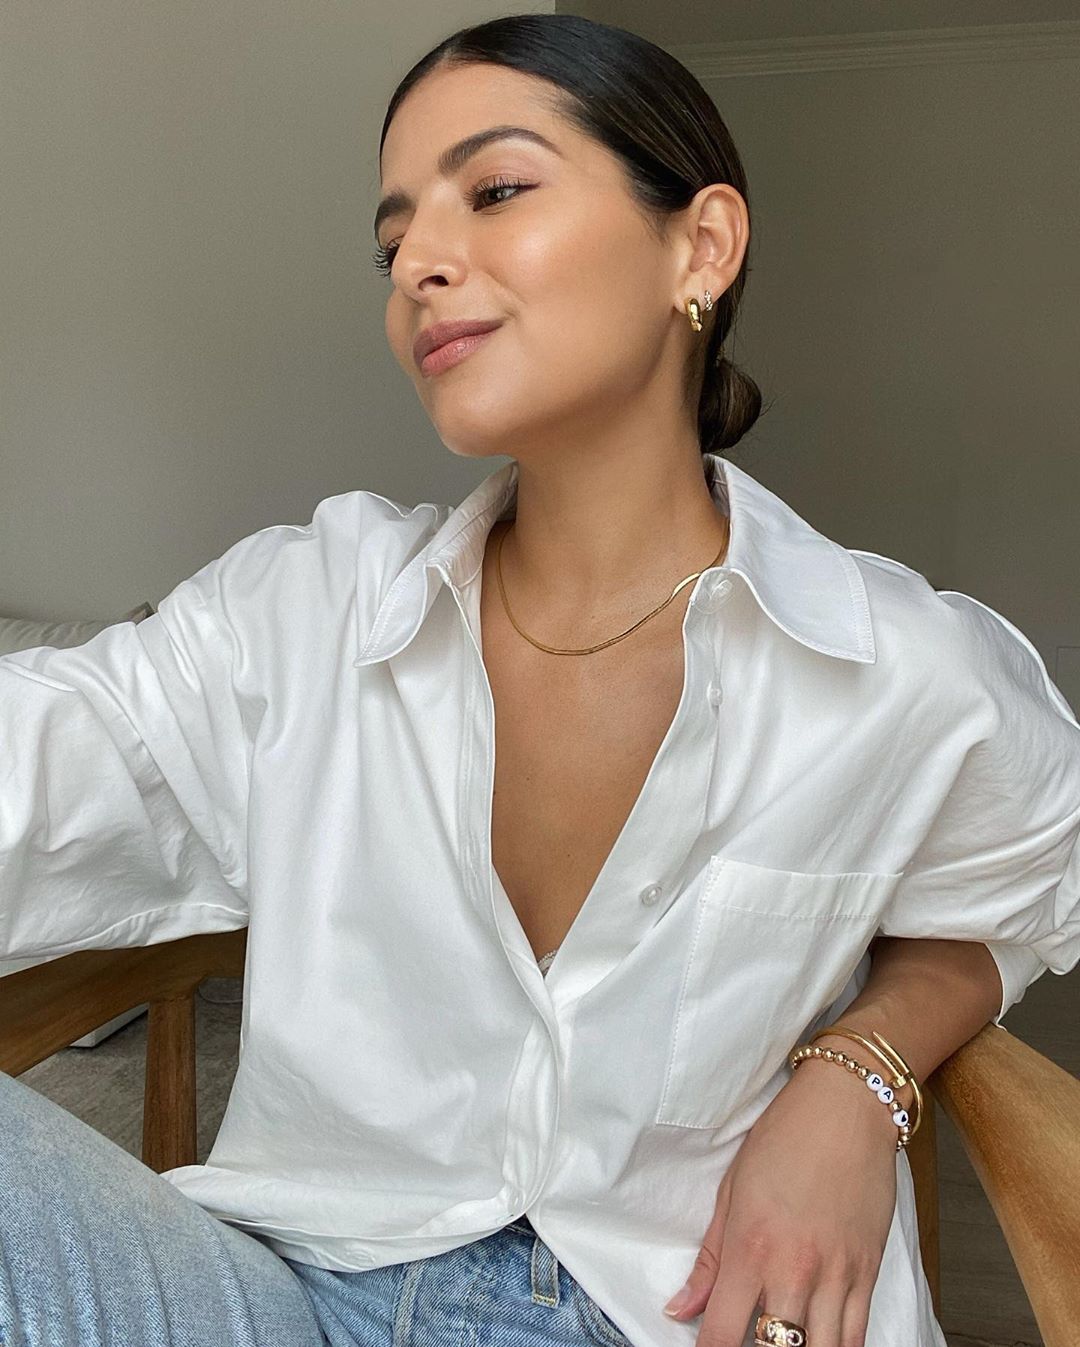 Easy Classic Fall Oufit Combo — Pam Arias in gold hoop earrings, delicate gold necklace, white button-down shirt and jeans